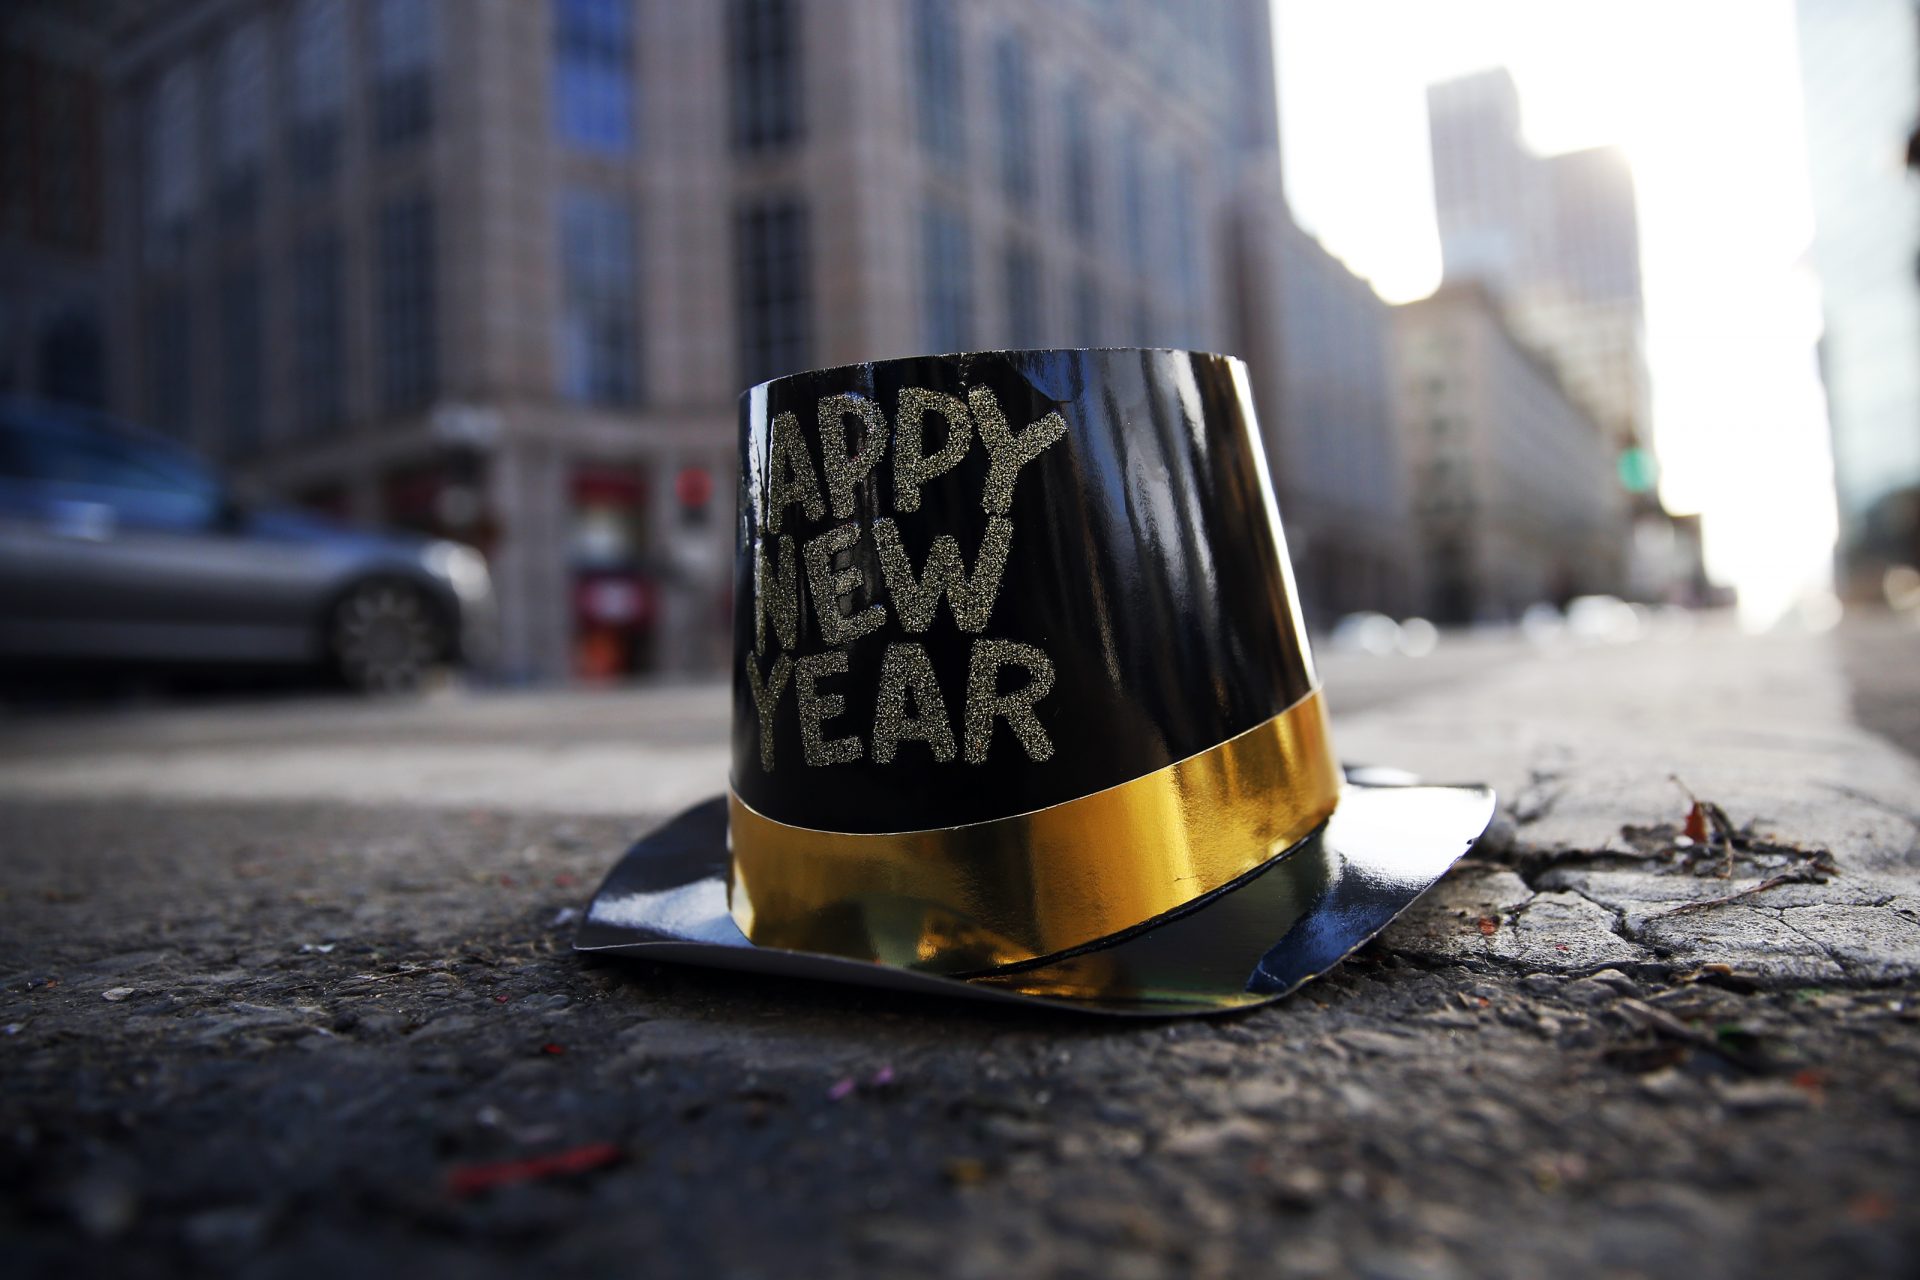 6th favorite: New Year’s Day